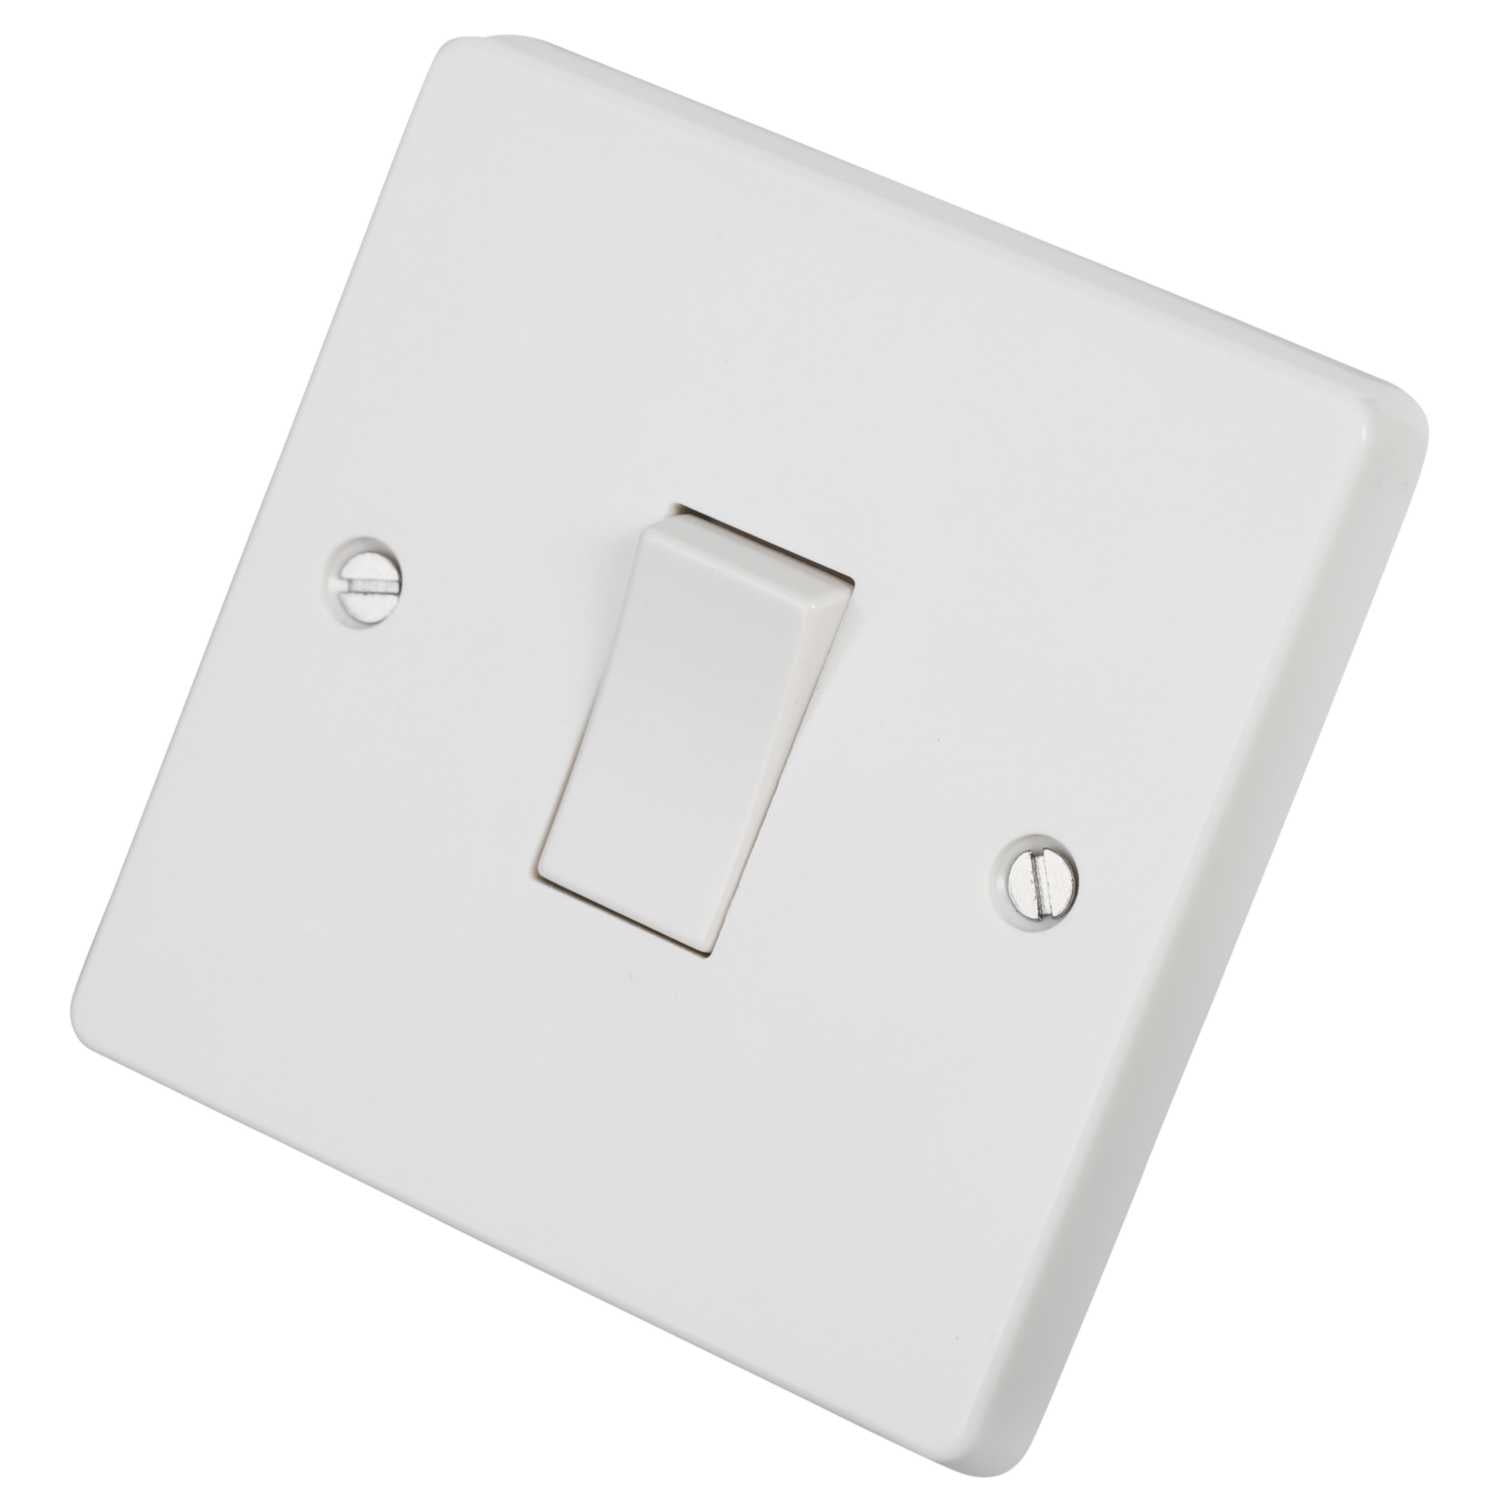 Crabtree 10A 1 Gang 1 Way Light Switch White | Supply Master | Accra, Ghana Switches & Sockets Buy Tools hardware Building materials